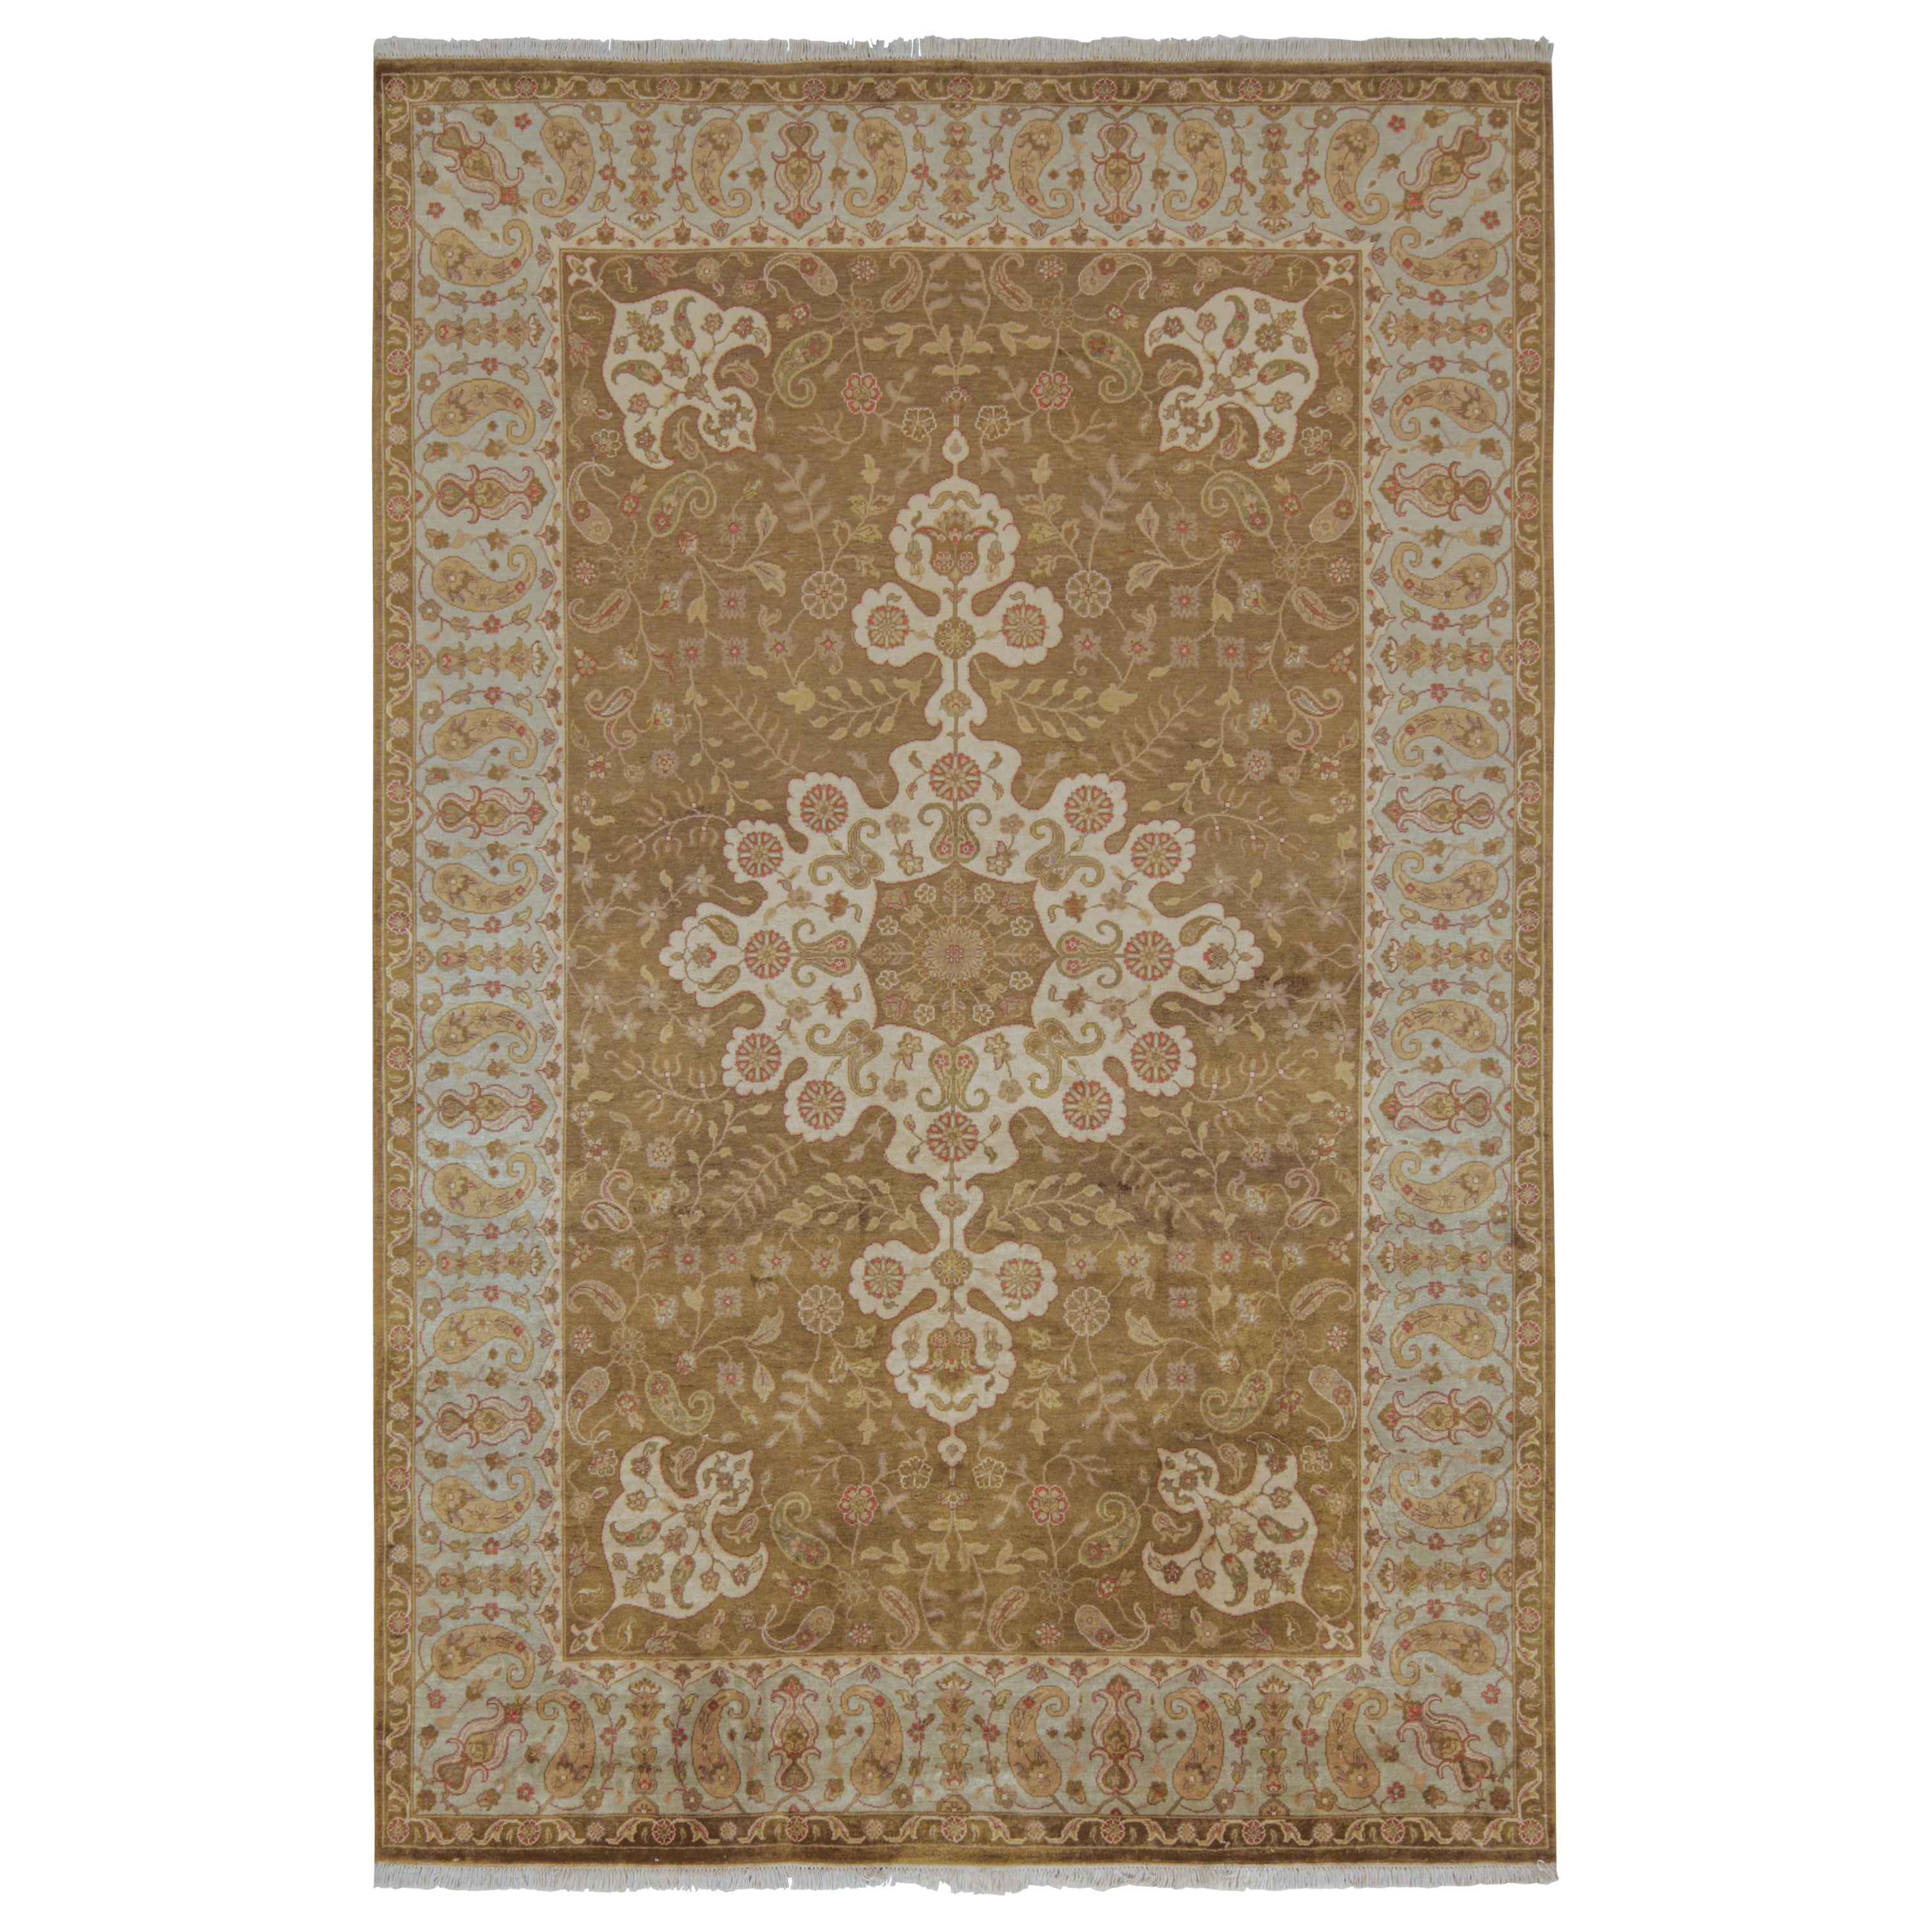 Rug & Kilim’s Classic Style rug with Brown and Off-White Medallion Floral Style For Sale